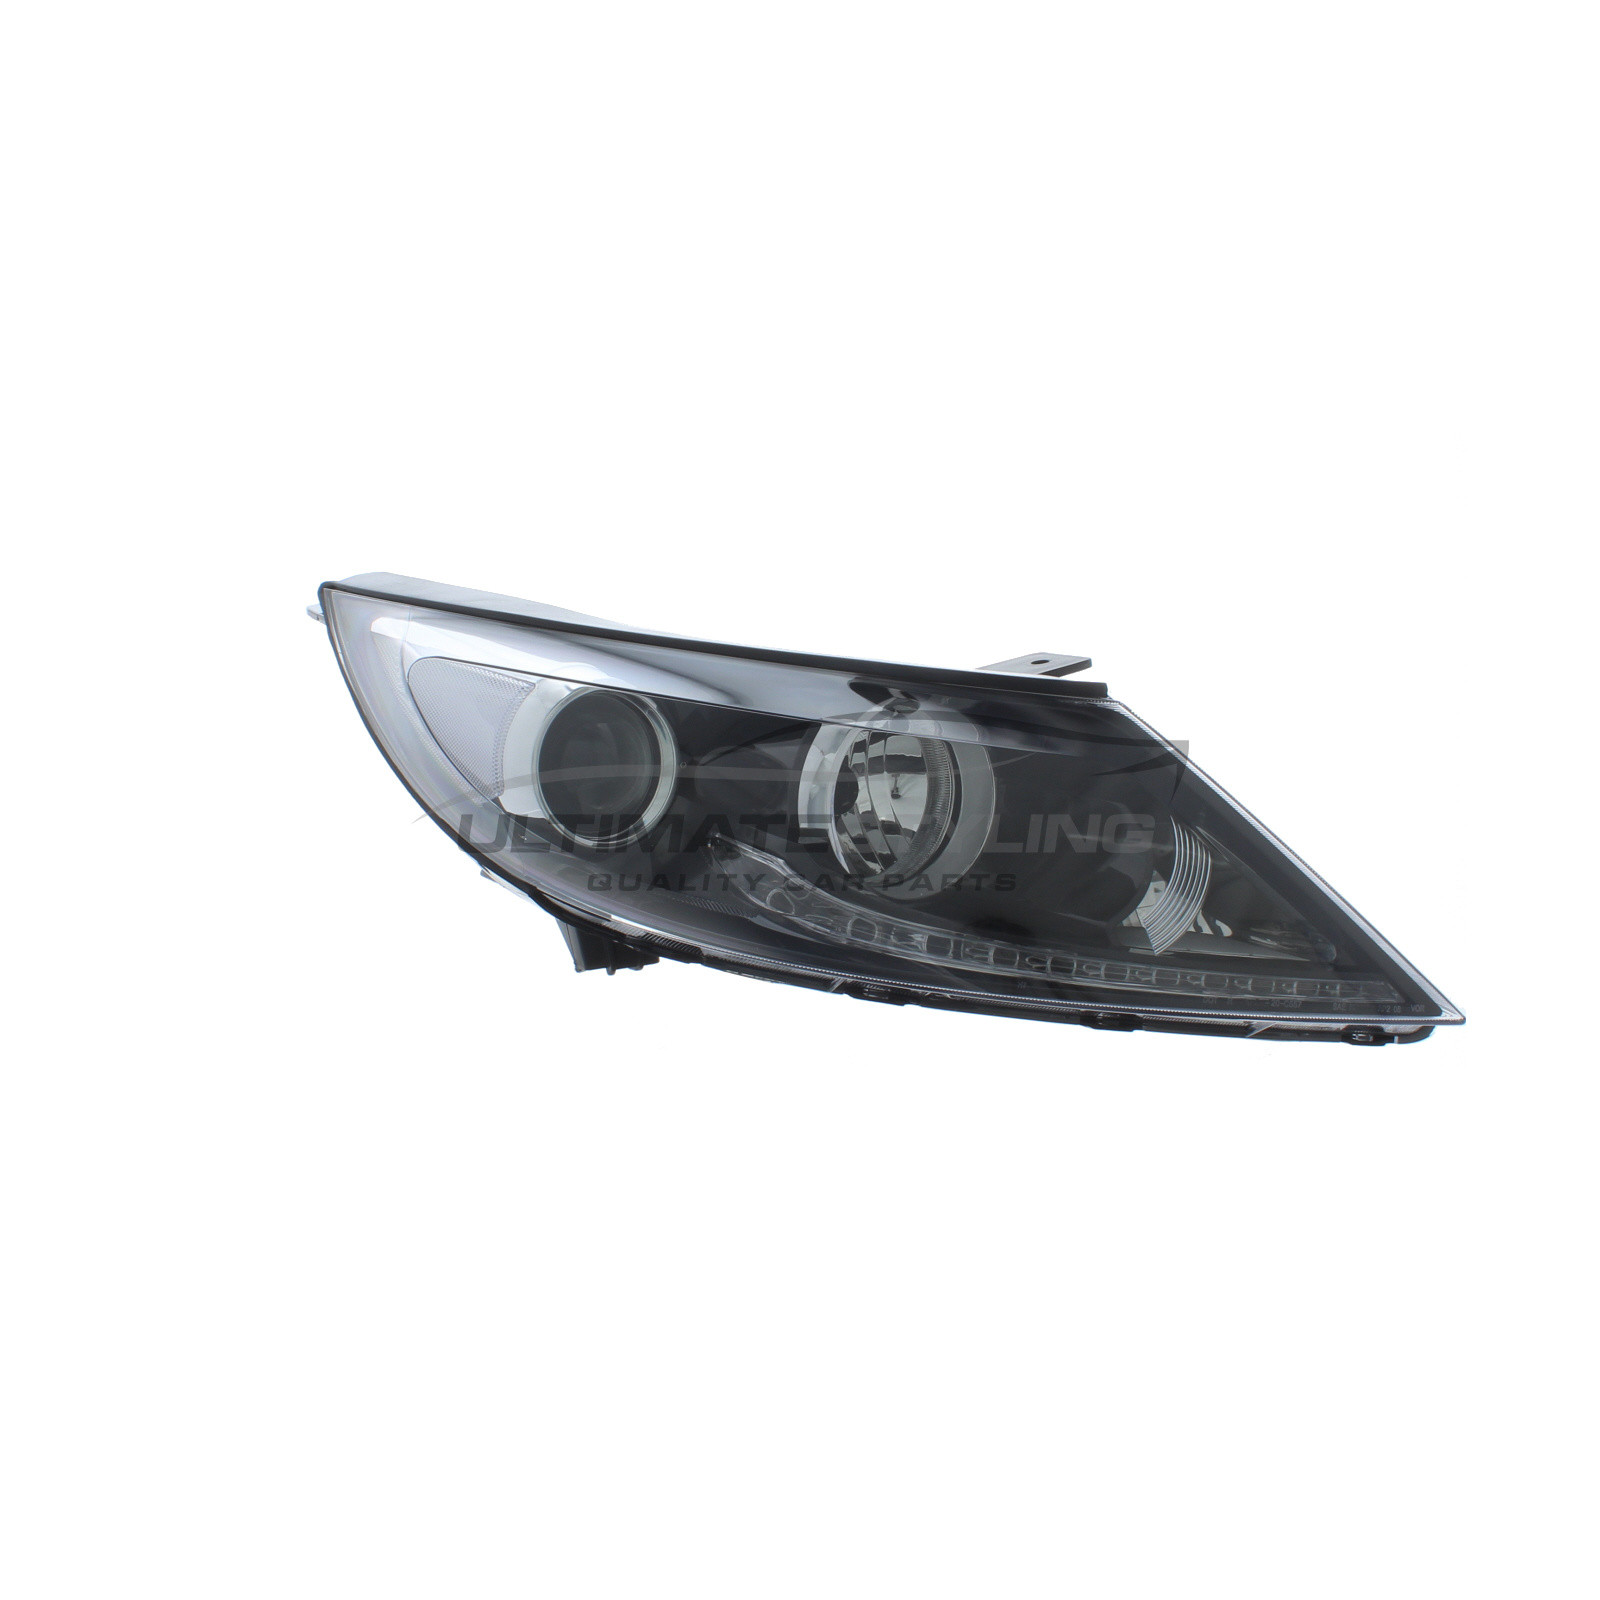 Kia Sportage 2010-2014 Halogen With LED Daytime Running Lamp, Electric Without Motor, Black Headlight / Headlamp Drivers Side (RH)